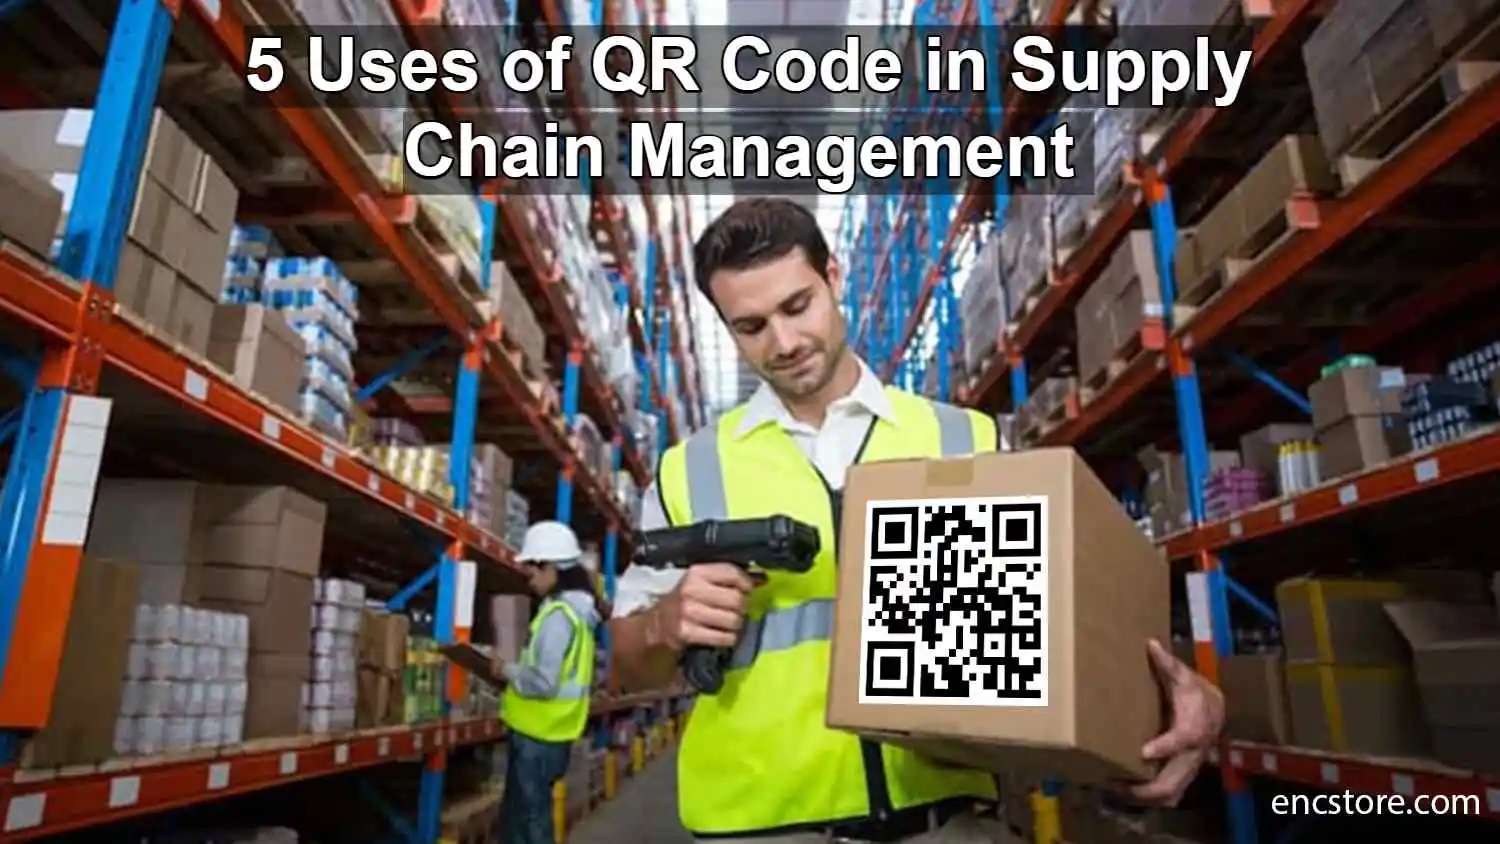 5 Uses of QR Code in Supply Chain Management